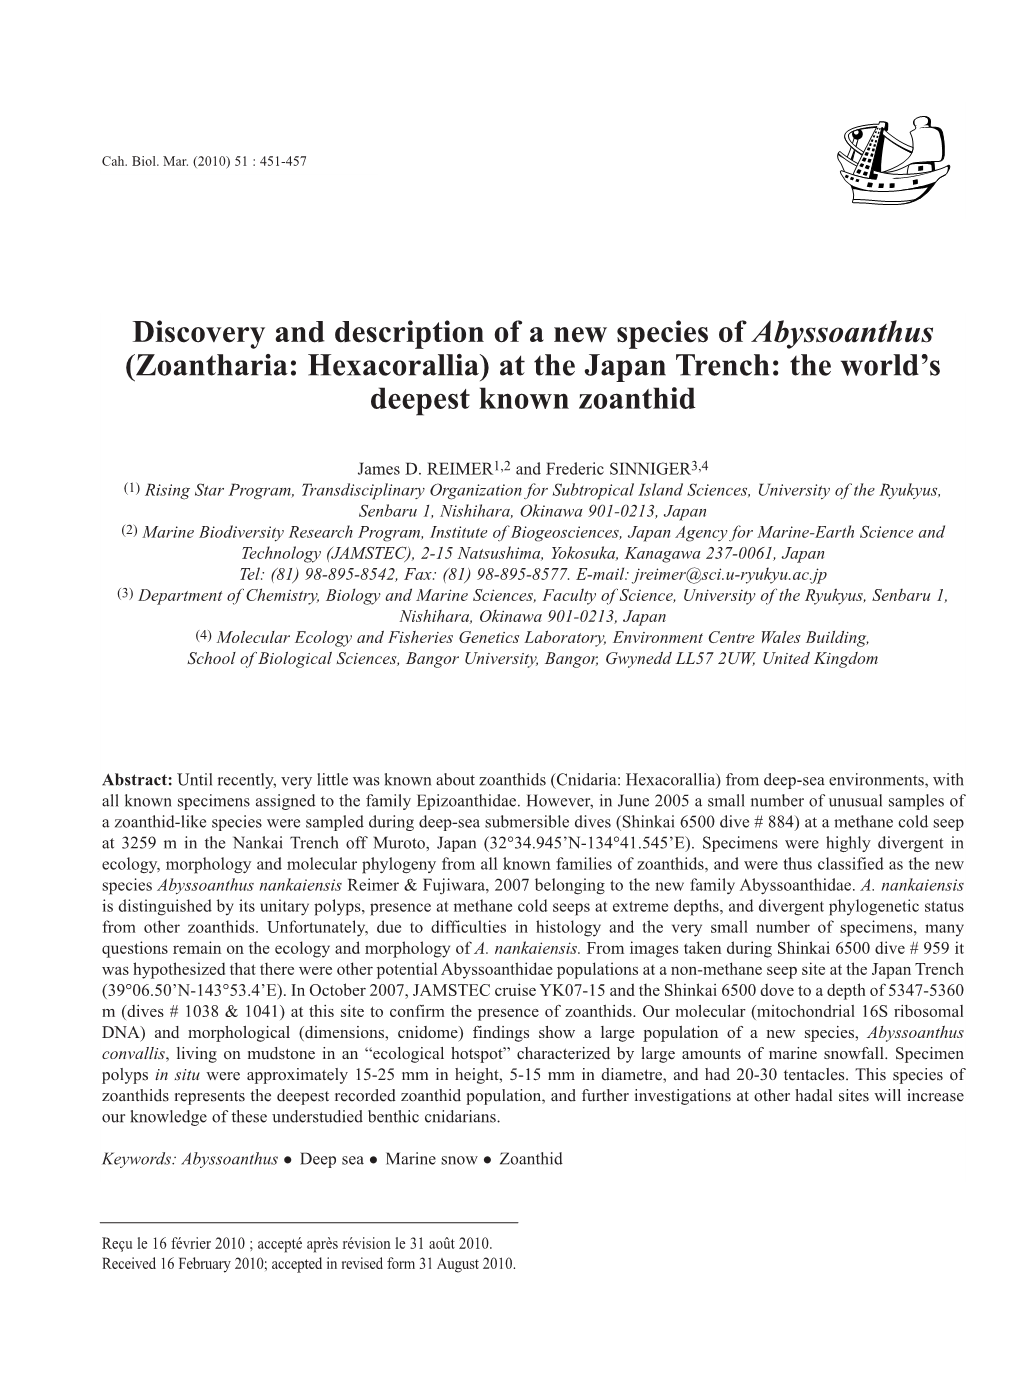 Discovery and Description of a New Species of Abyssoanthus (Zoantharia: Hexacorallia) at the Japan Trench: the World’S Deepest Known Zoanthid